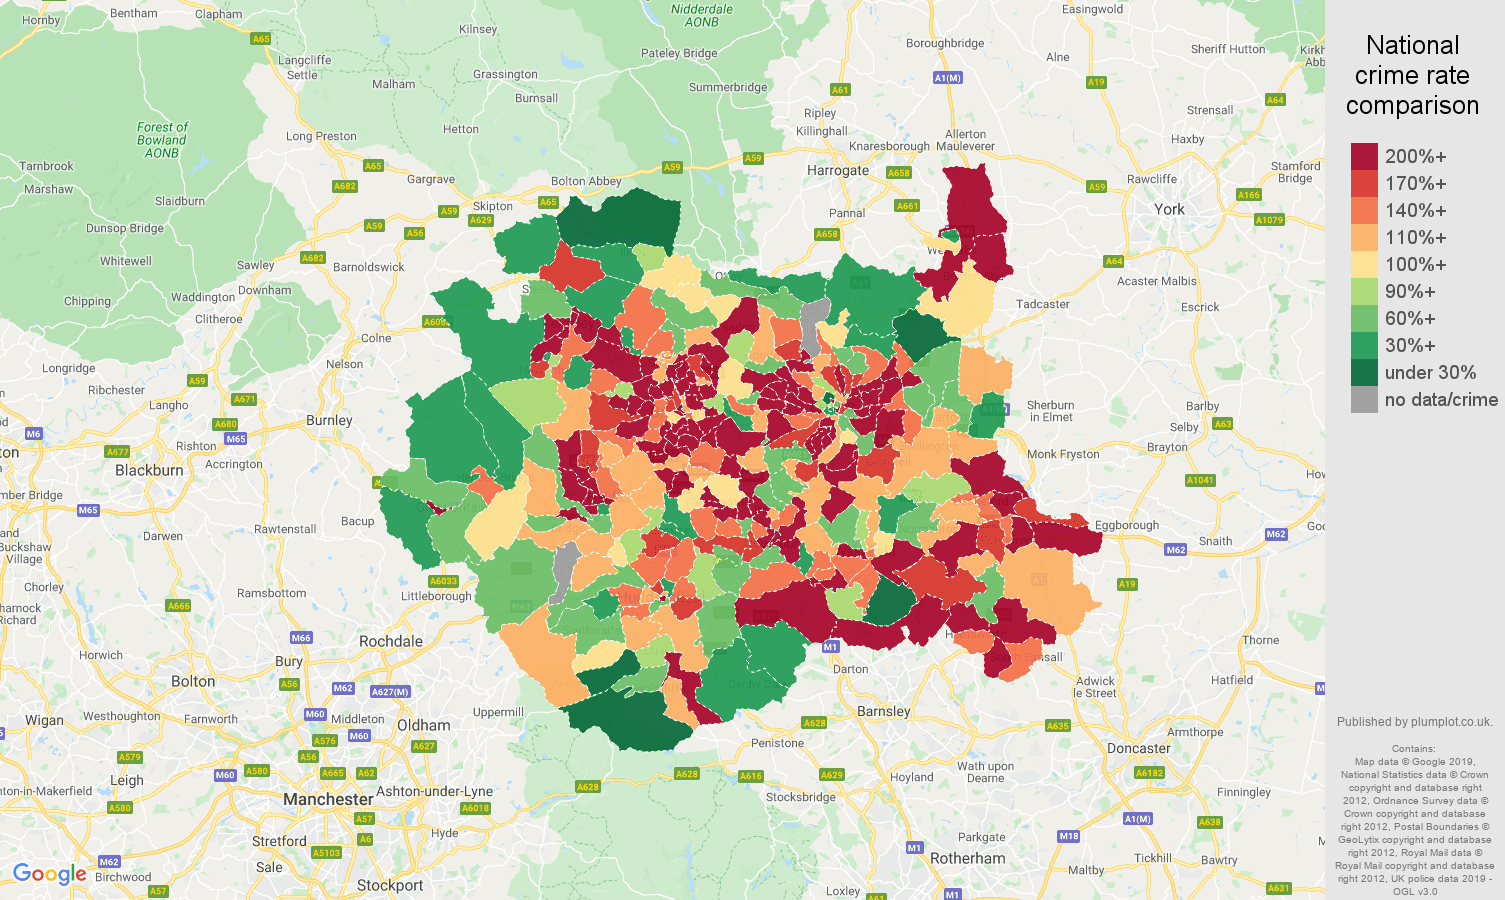 West Yorkshire other crime rate comparison map